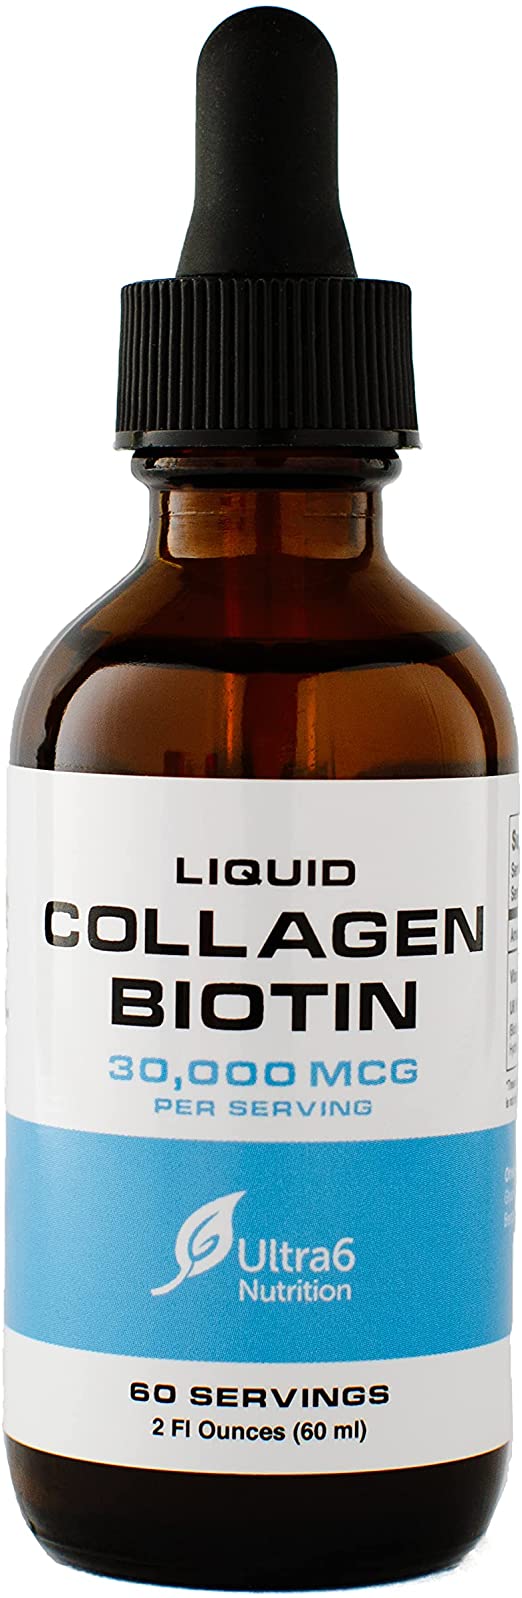 Liquid Collagen Biotin Drops. Liquid Collagen for Women and Men. Liquid Biotin for Hair Growth, Healthy Nails and Skin with 30,000 mcg   Vitamin C - Made in The USA.